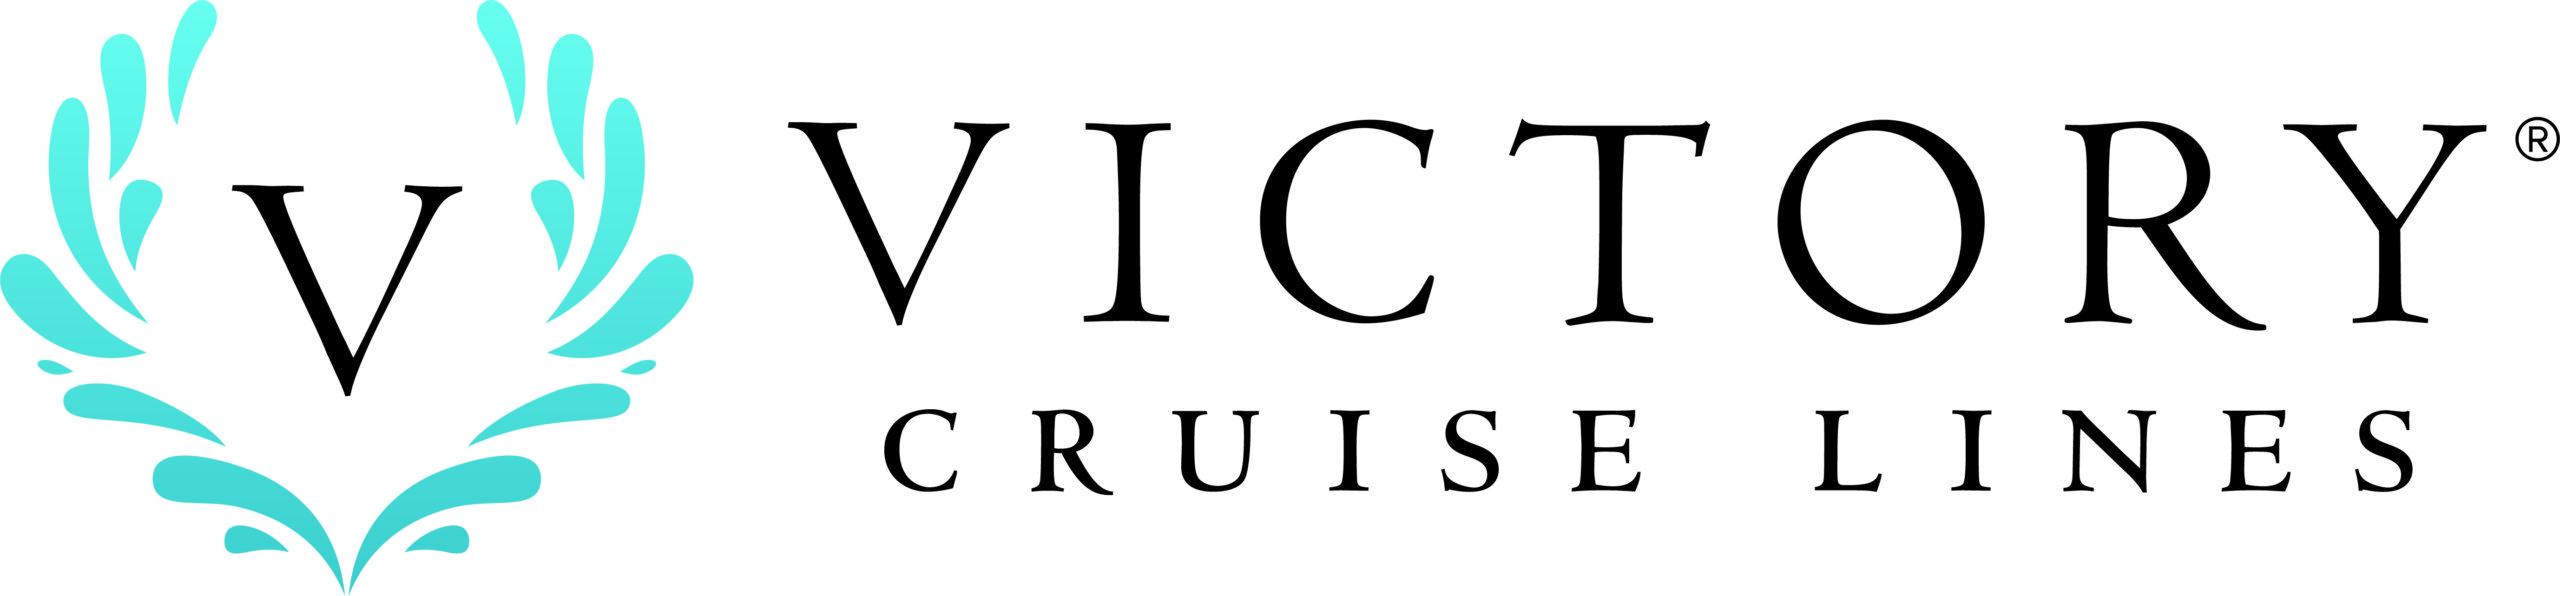 Victory Cruise Lines Logo